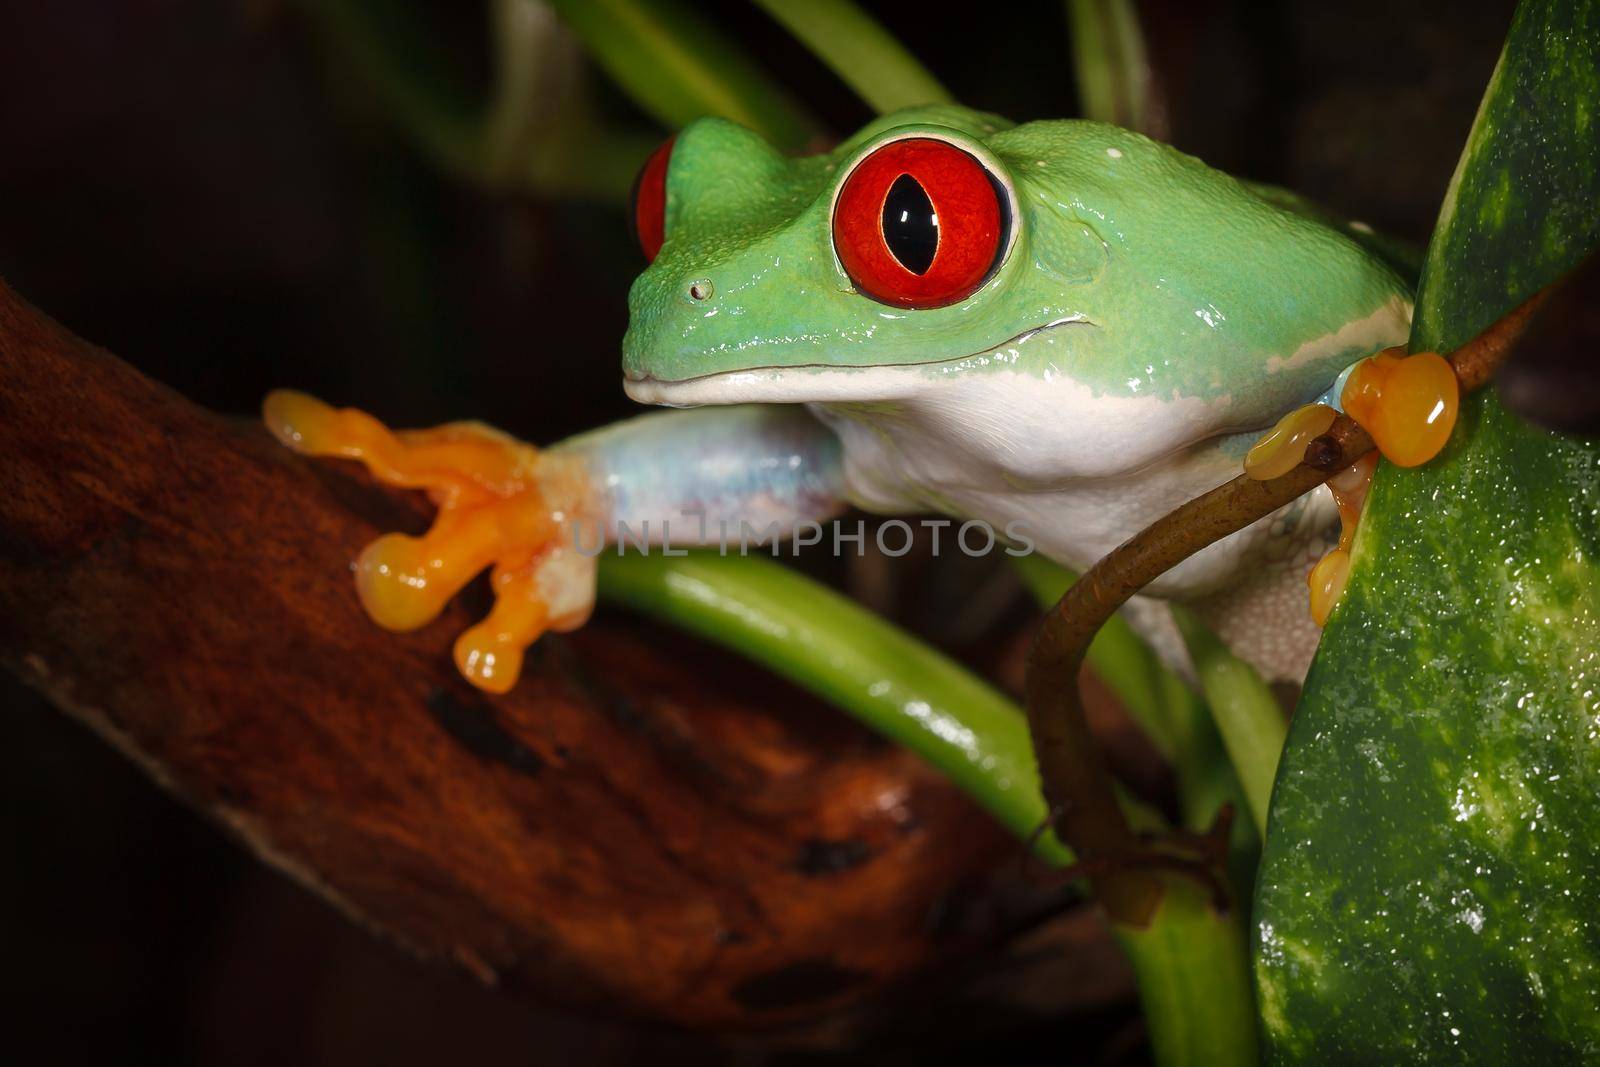 Red eyed tree frog carefully watching the environment between the plants leafs